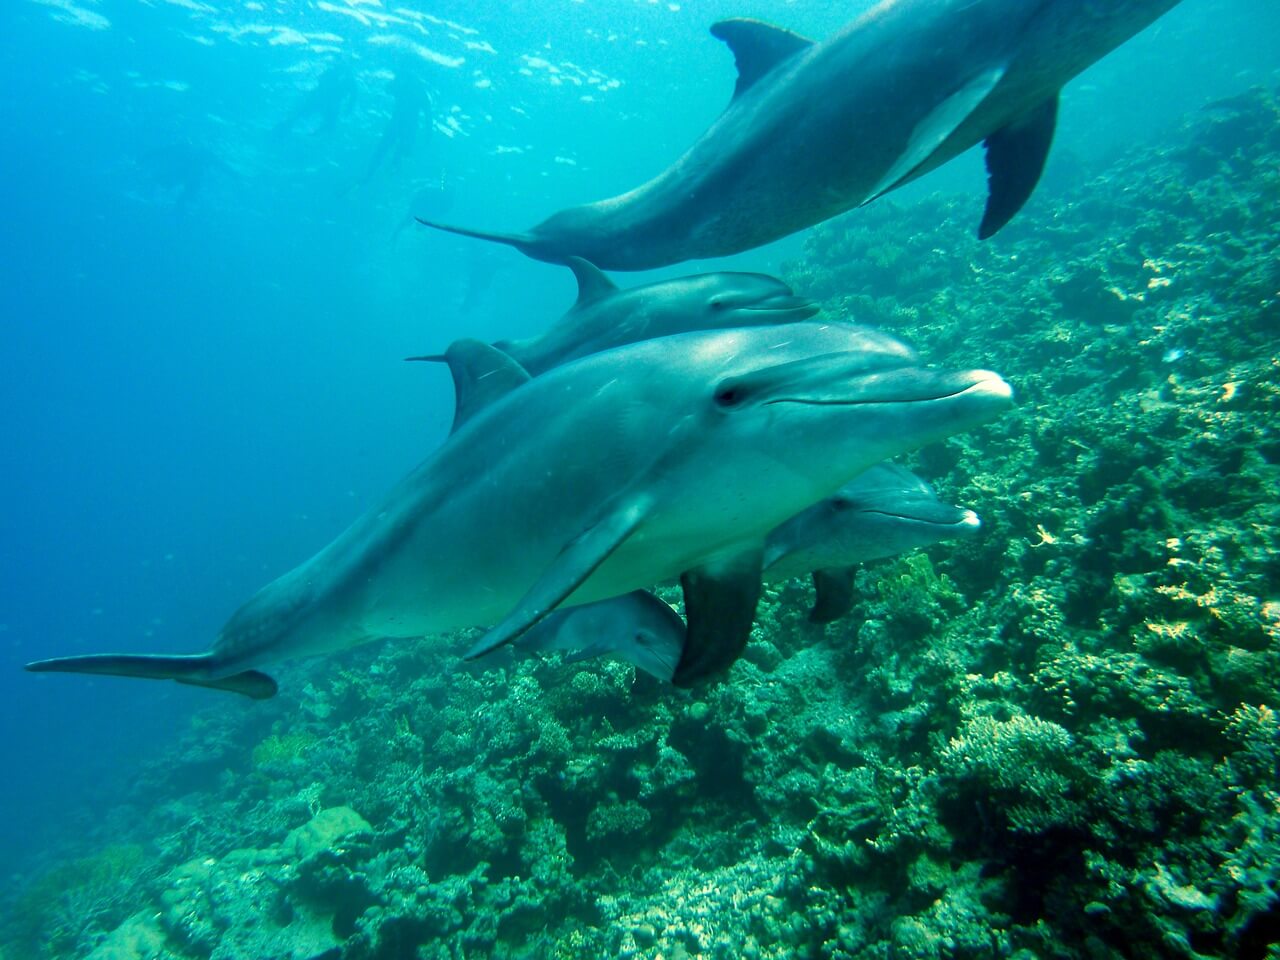 Some dolphins.